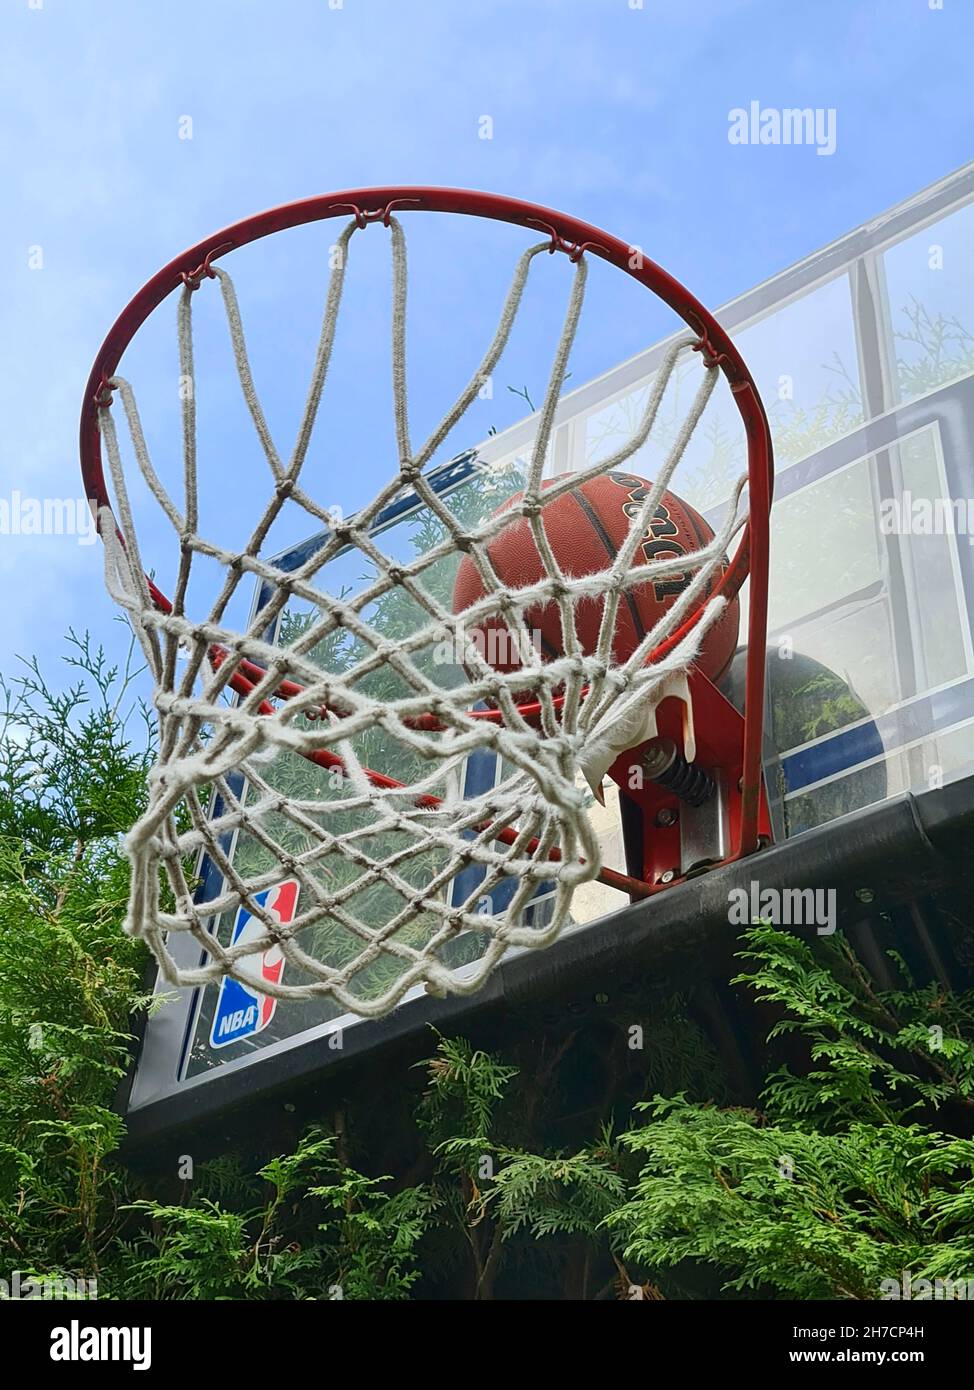 Basketball is thrown into the basket Stock Photo